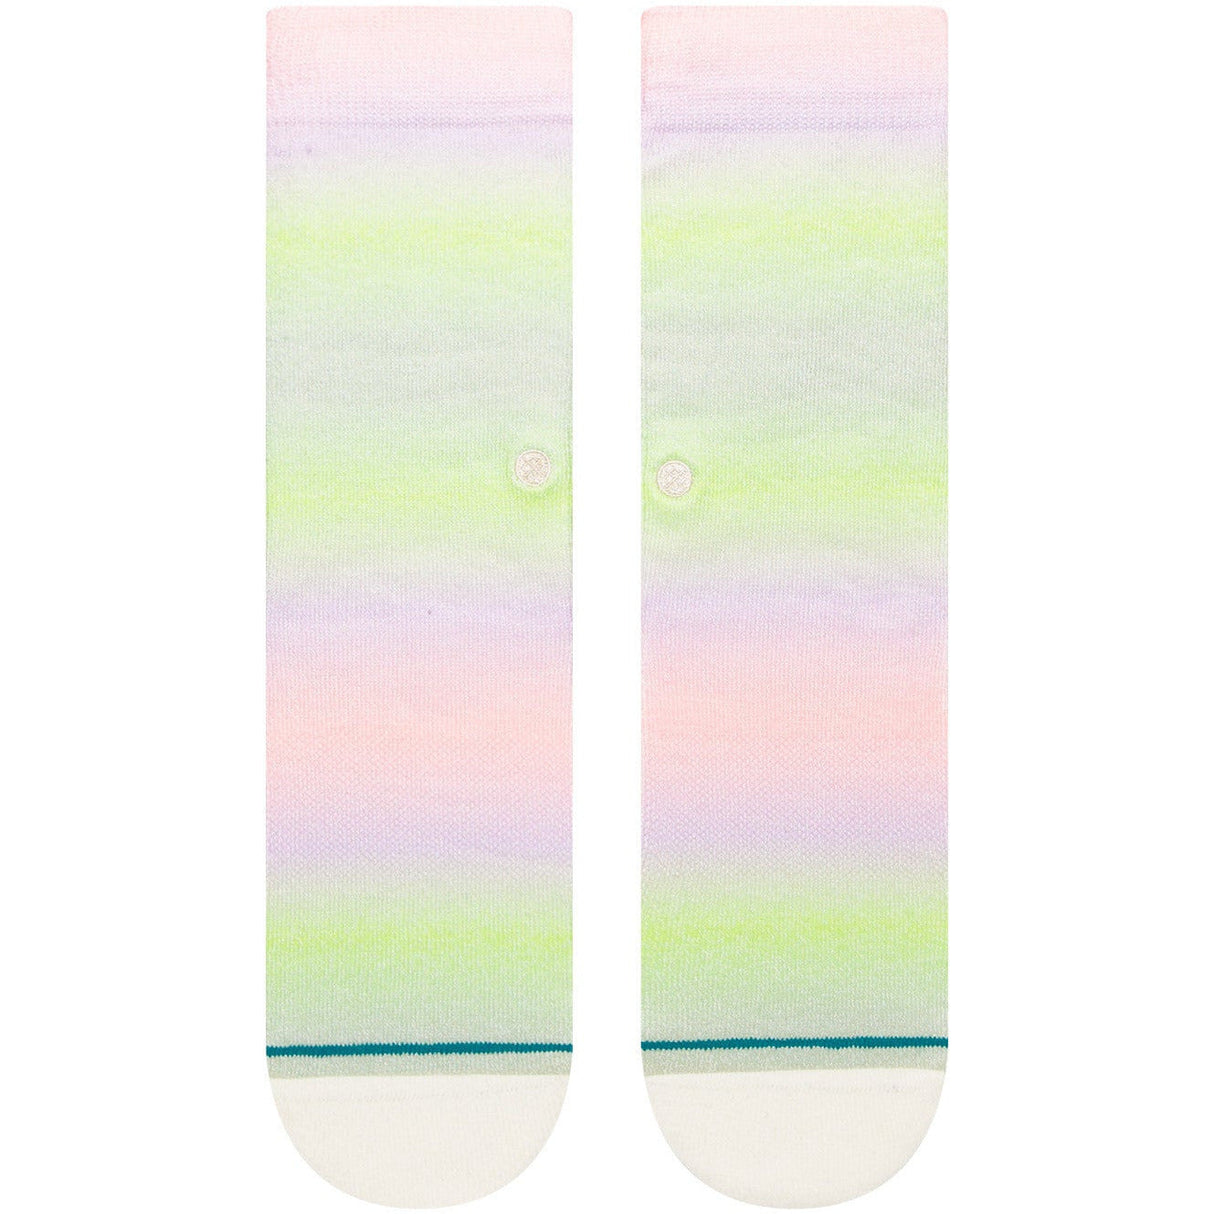 Stance Womens Good Days Crew Socks  -  Small / Ombre